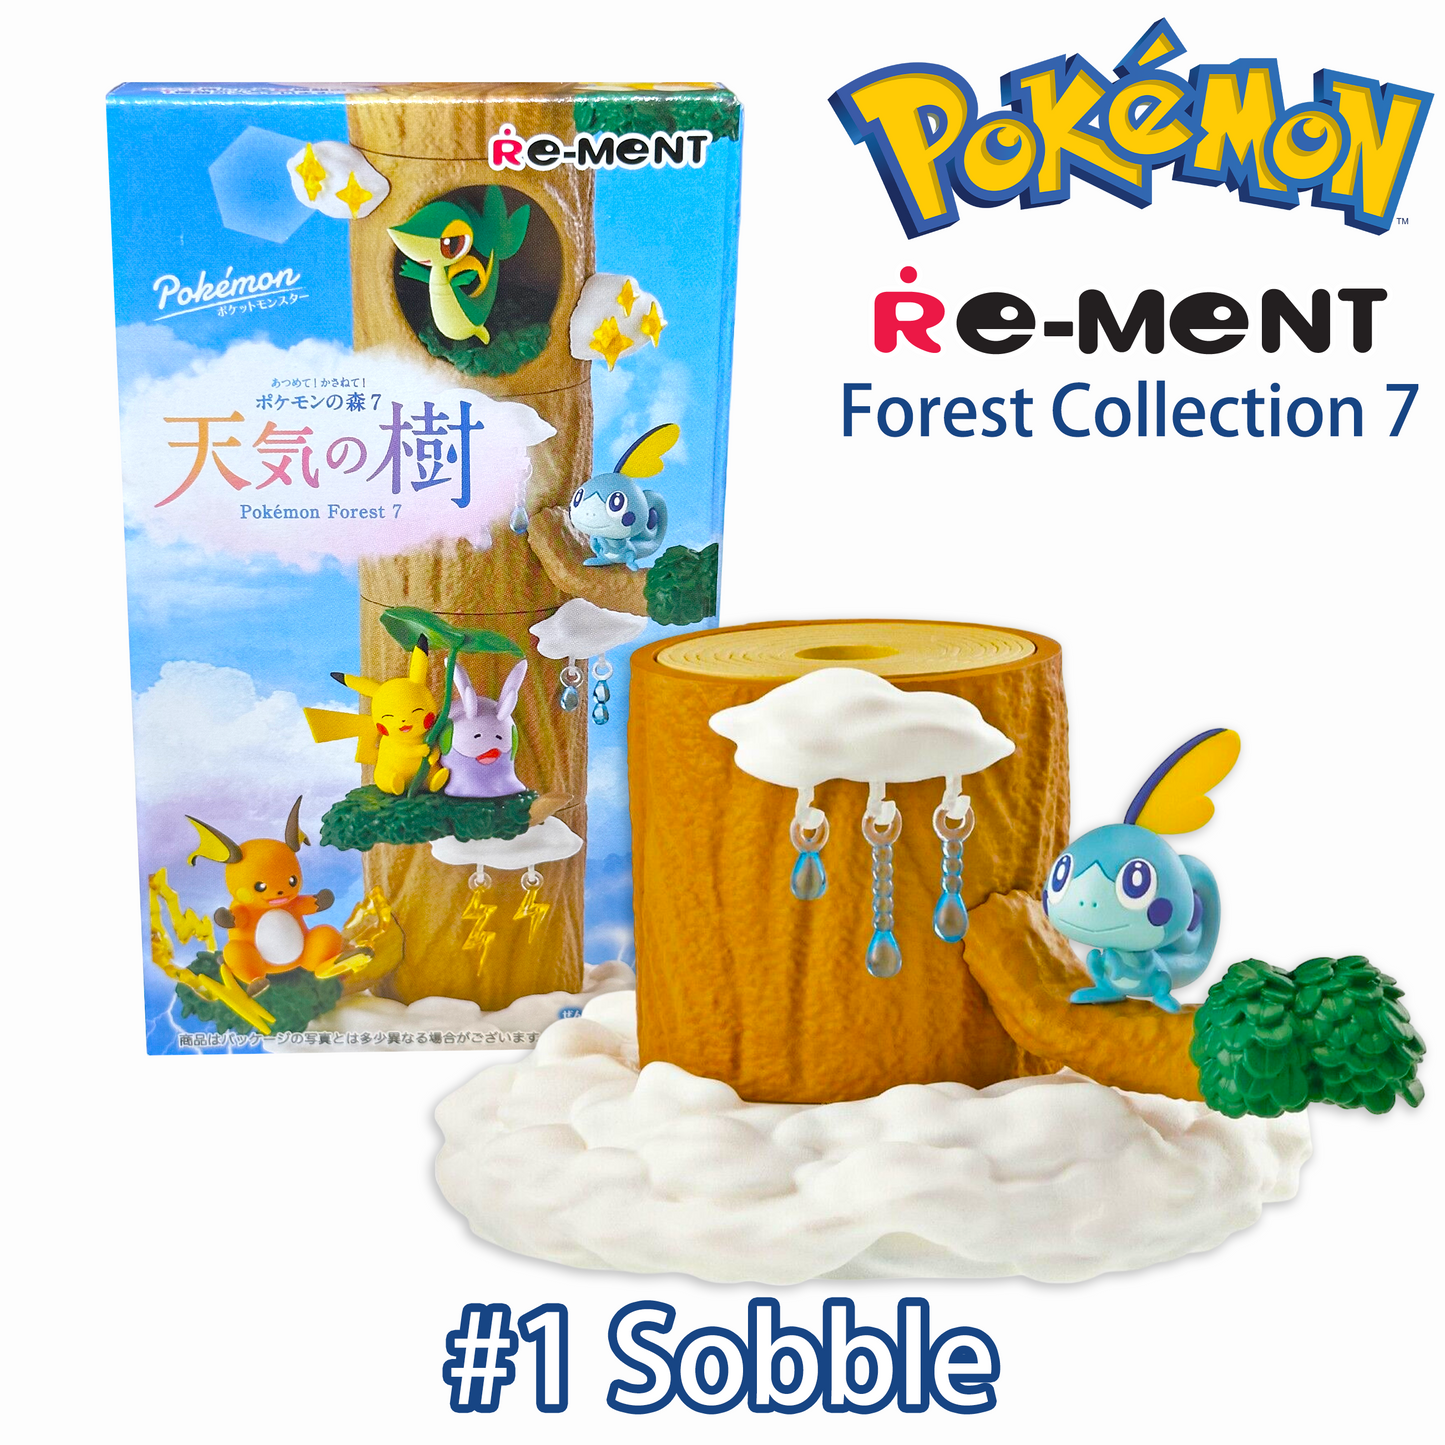 SOBBLE - Pokemon RE-MENT Forest Collection 7 - Mini Display #1 (NEW)